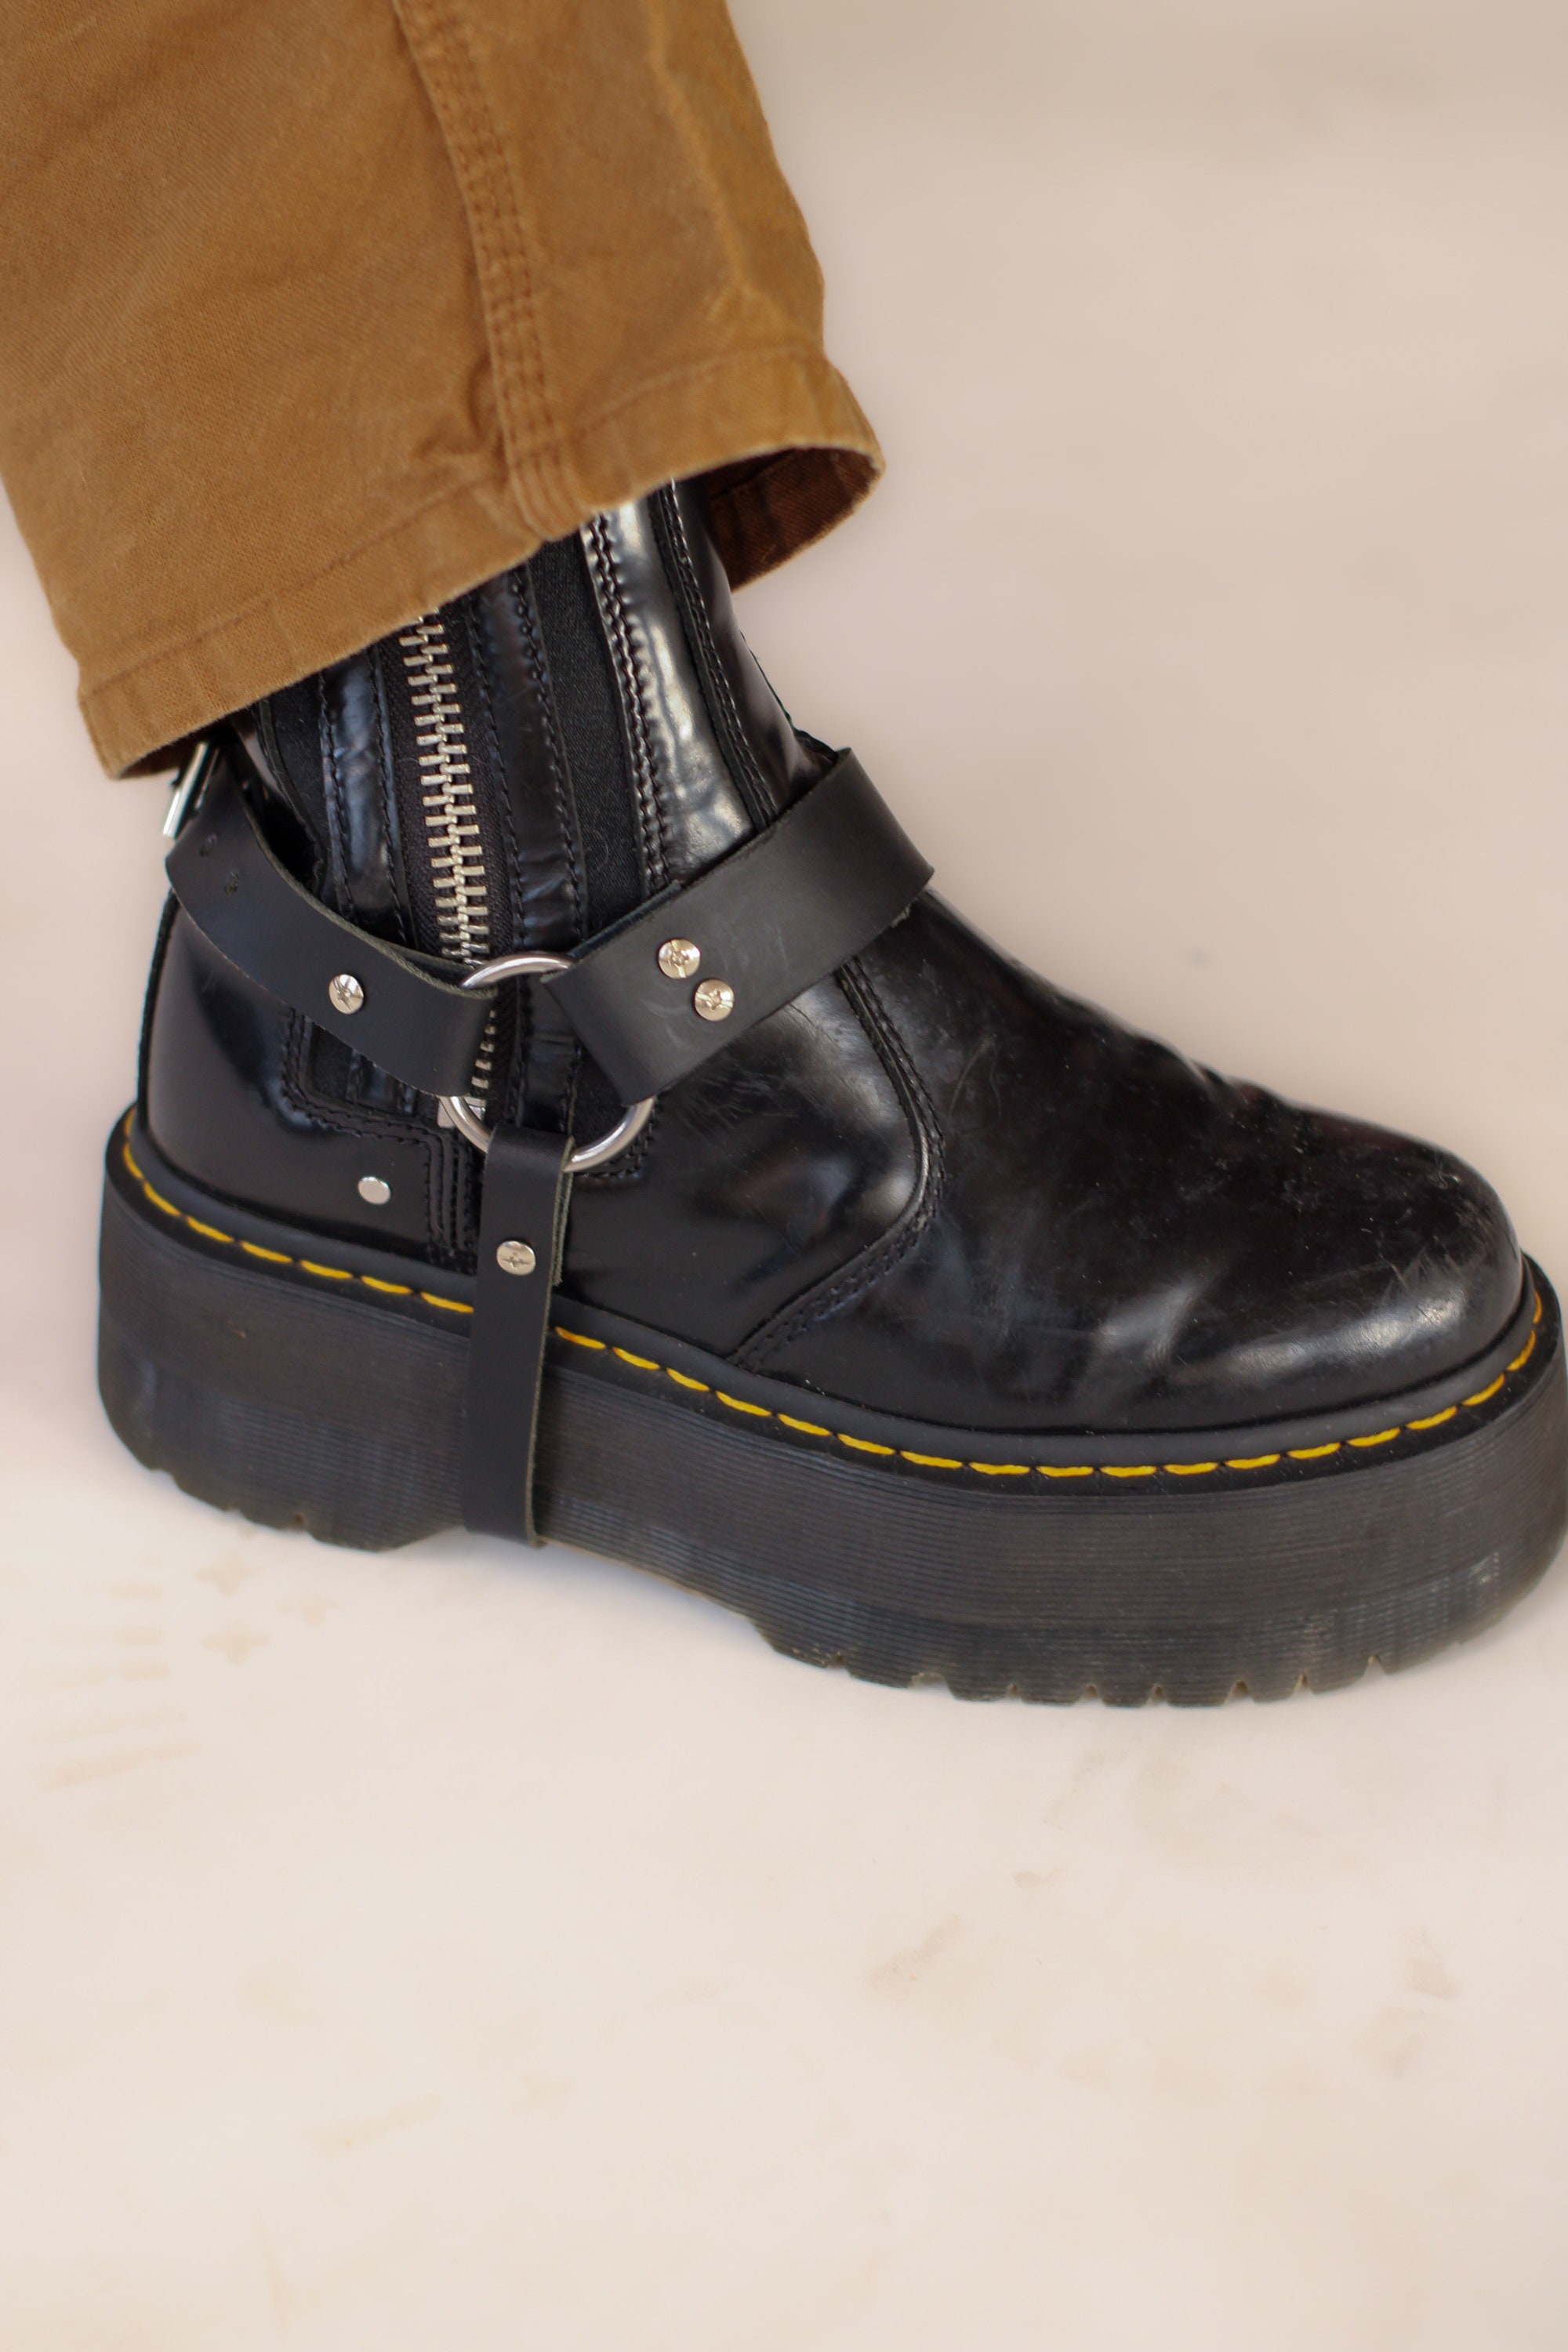 BOOT STRAPS BLACK 2 Sizes for Better Fit Adjustable 